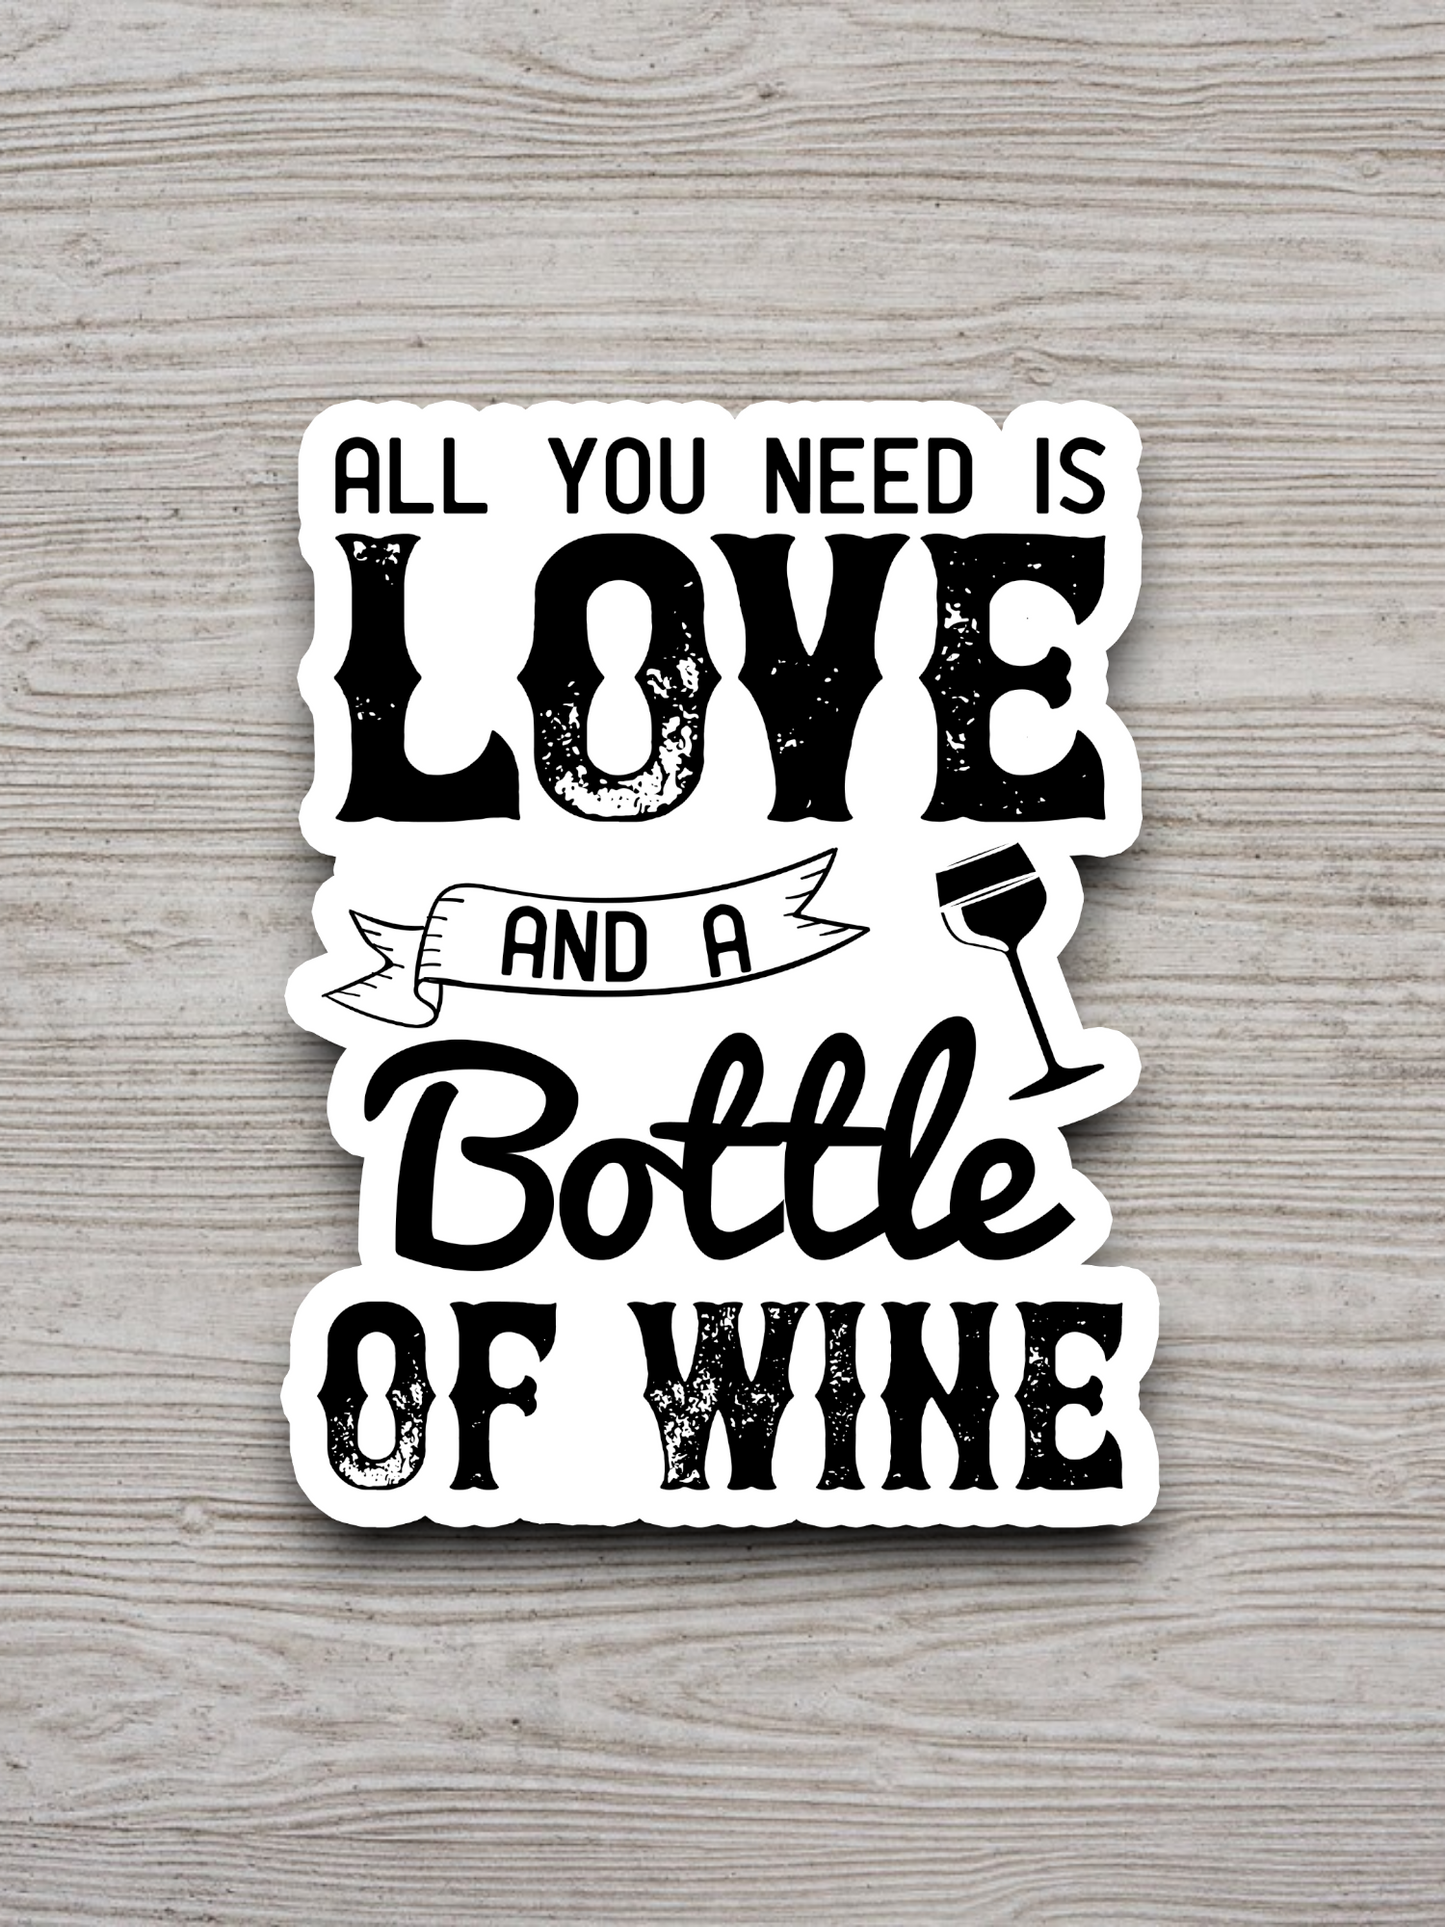 All You Need Is Love And A Bottle Of Wine Sticker